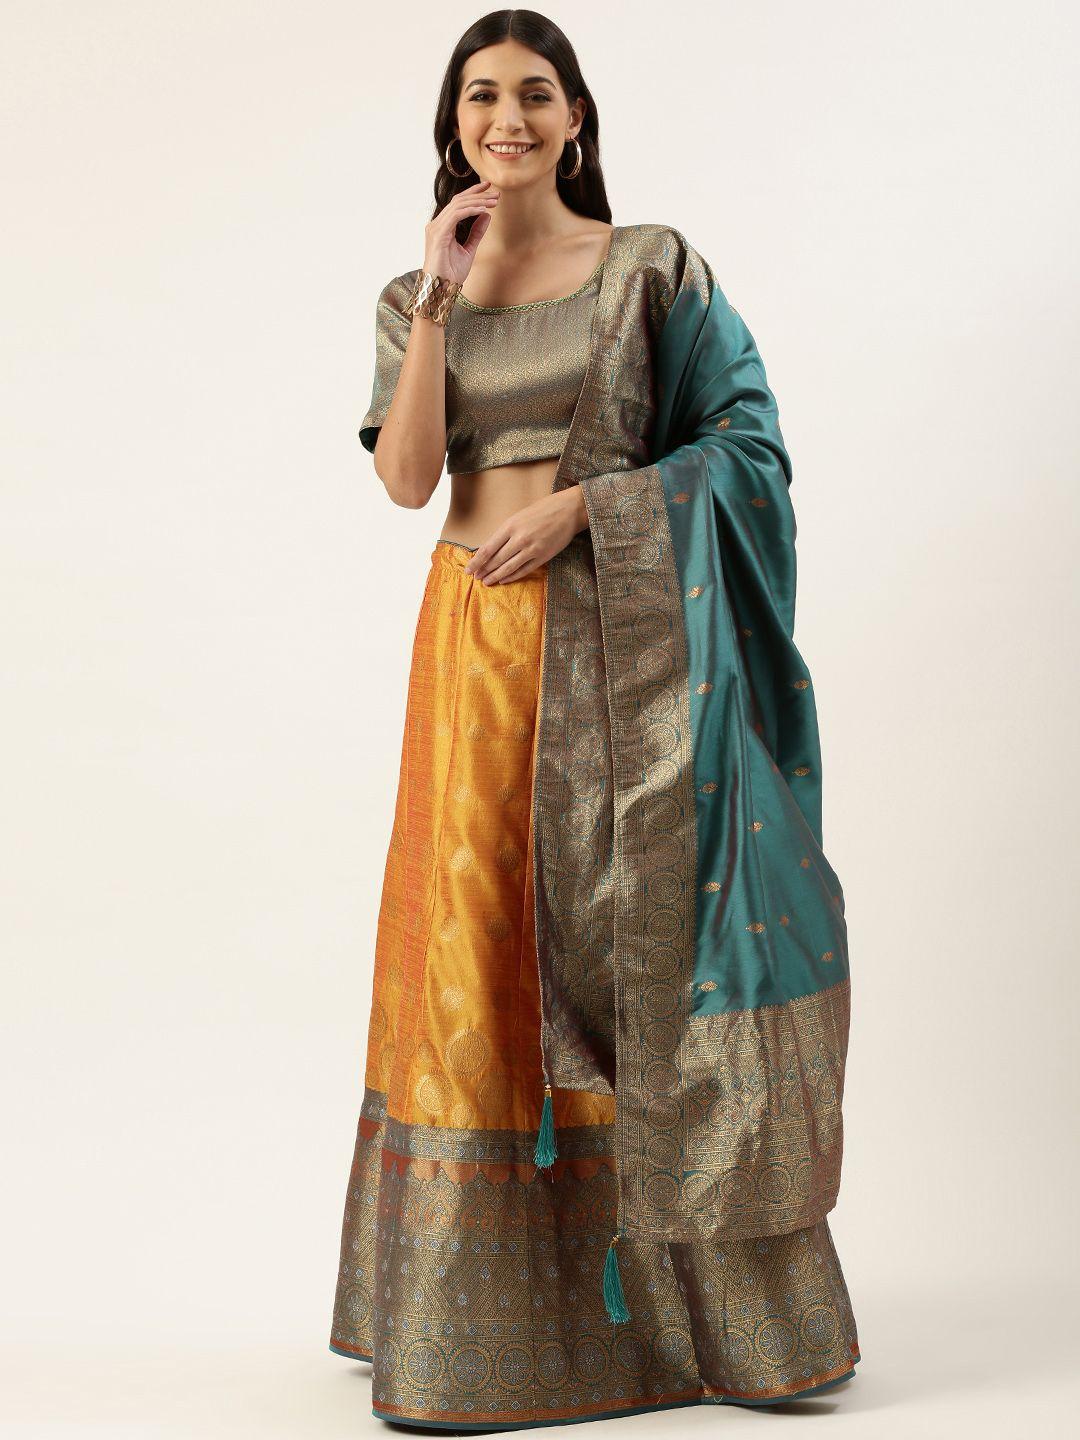 pothys-teal-&-mustard-yellow-unstitched-lehenga-&-blouse-with-dupatta